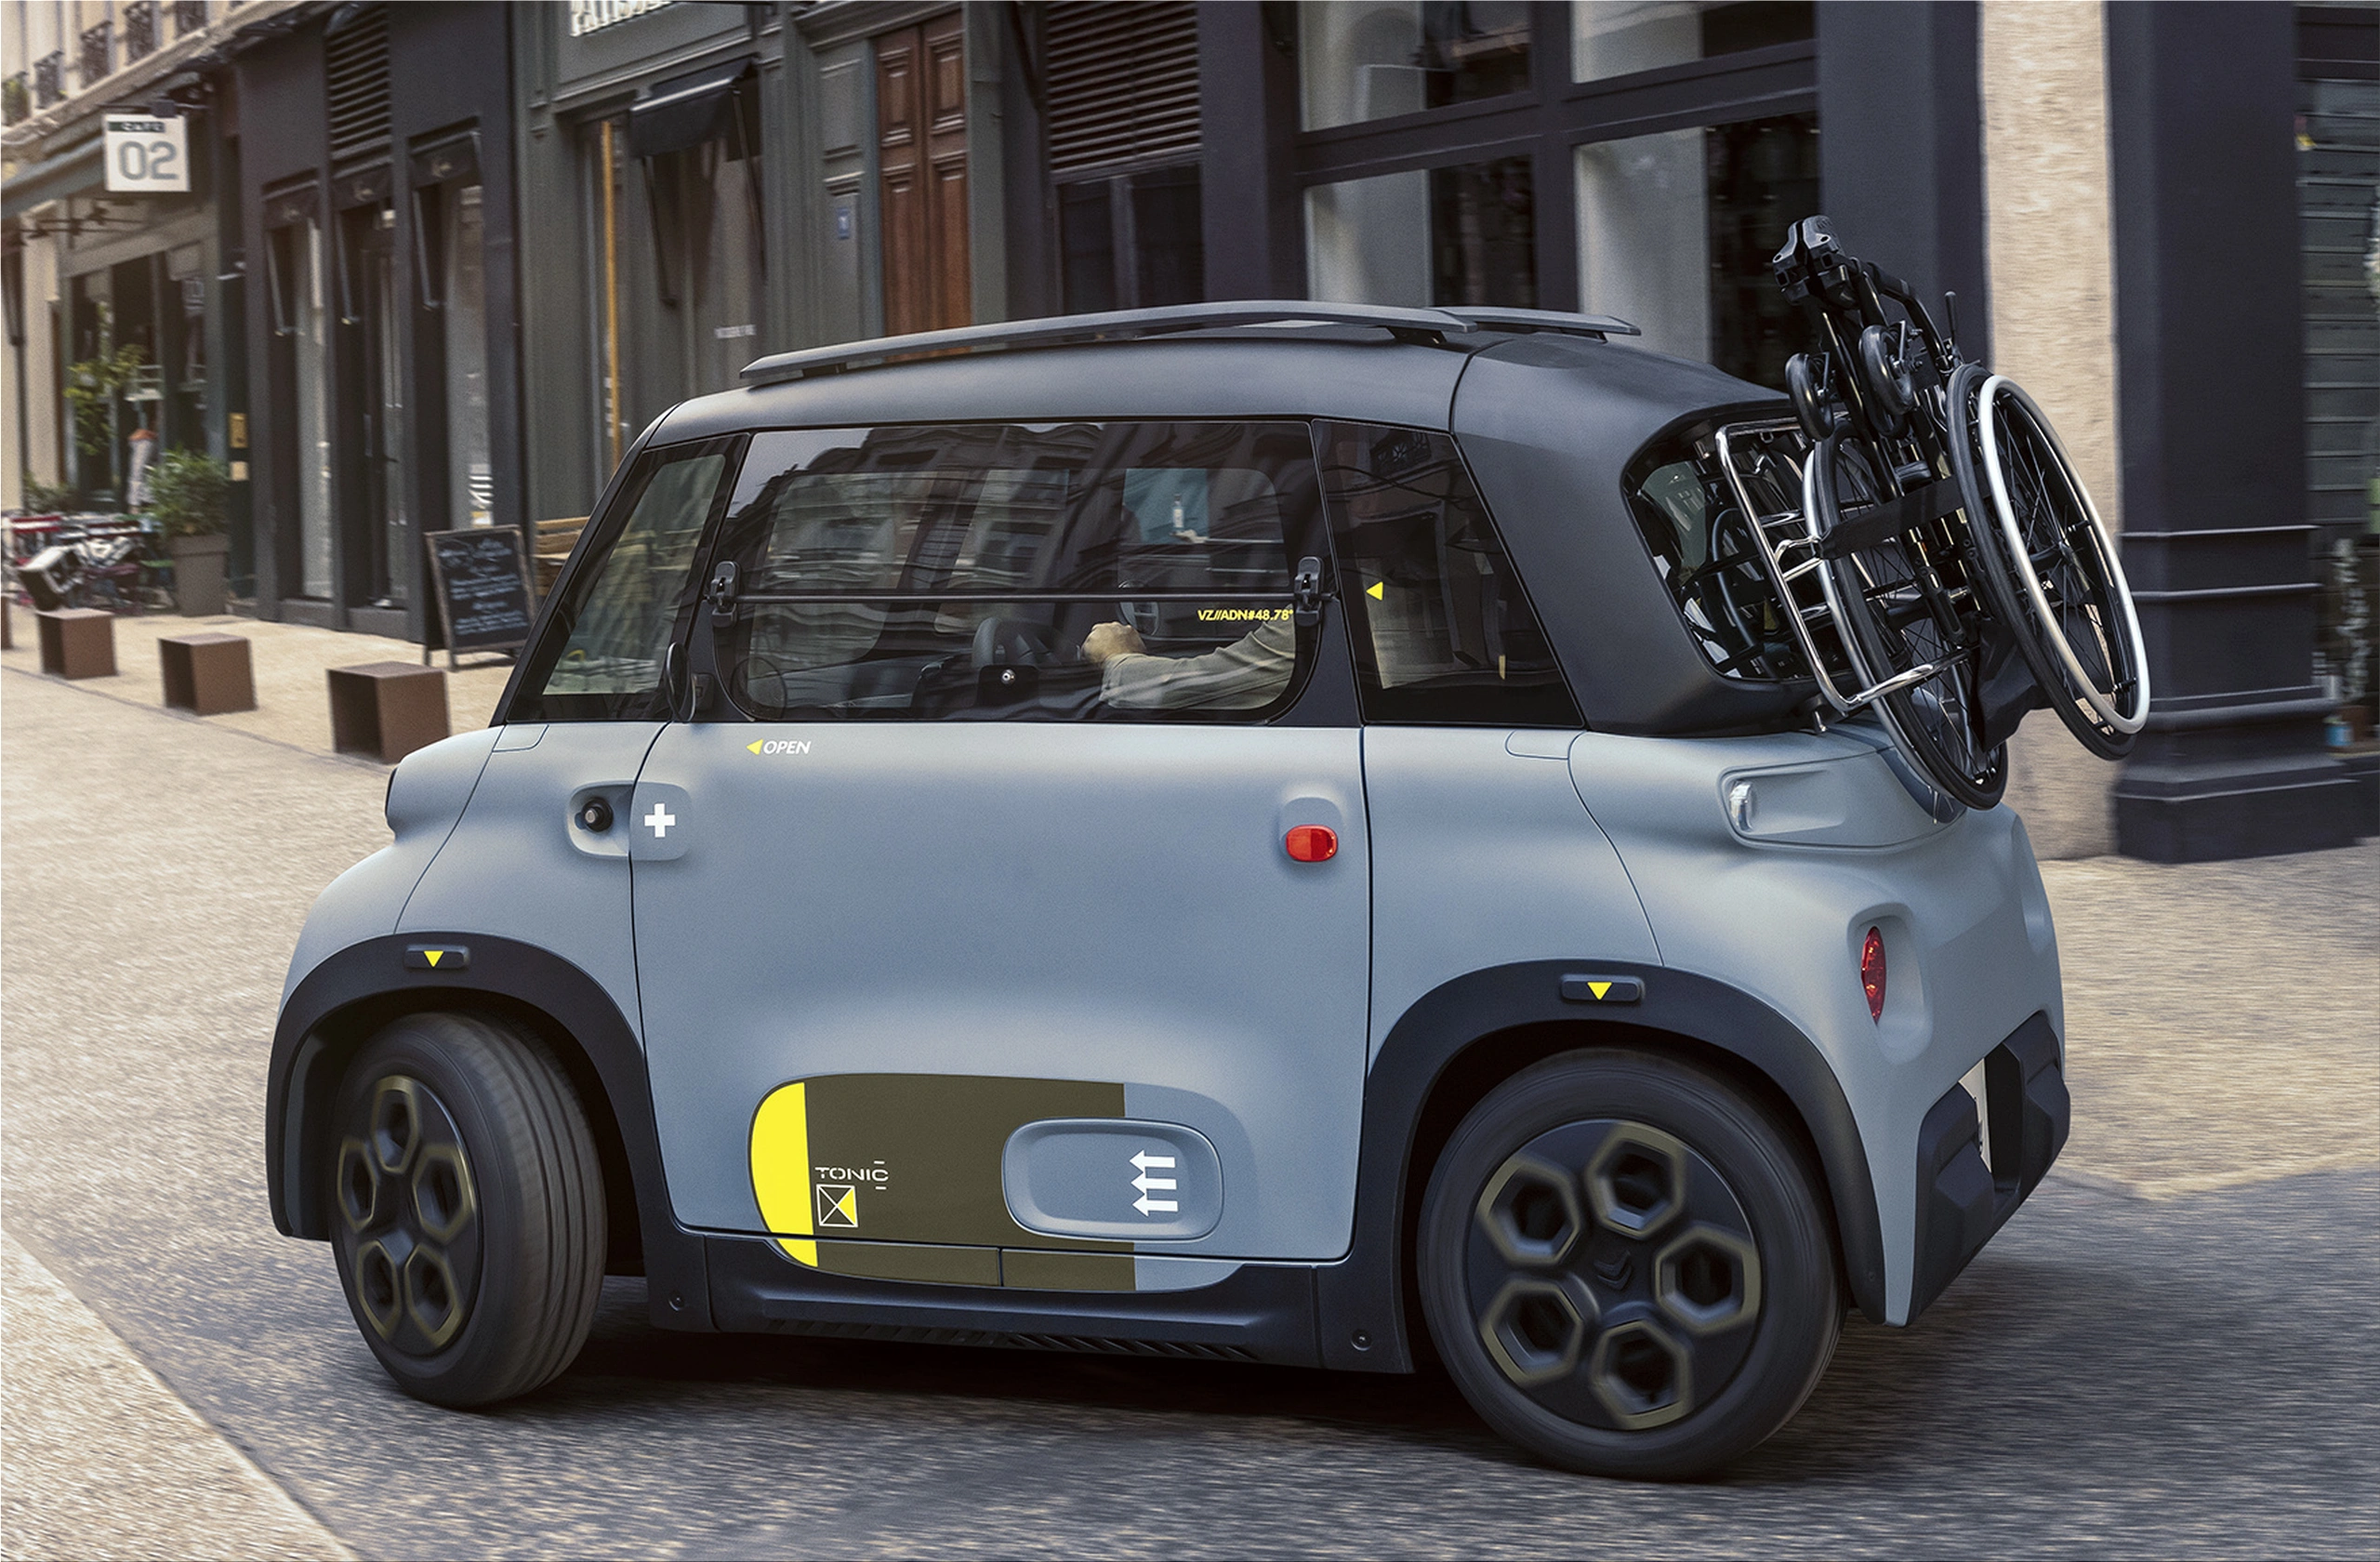 Citroen Ami for All: A New Mobility Solution for People With ...